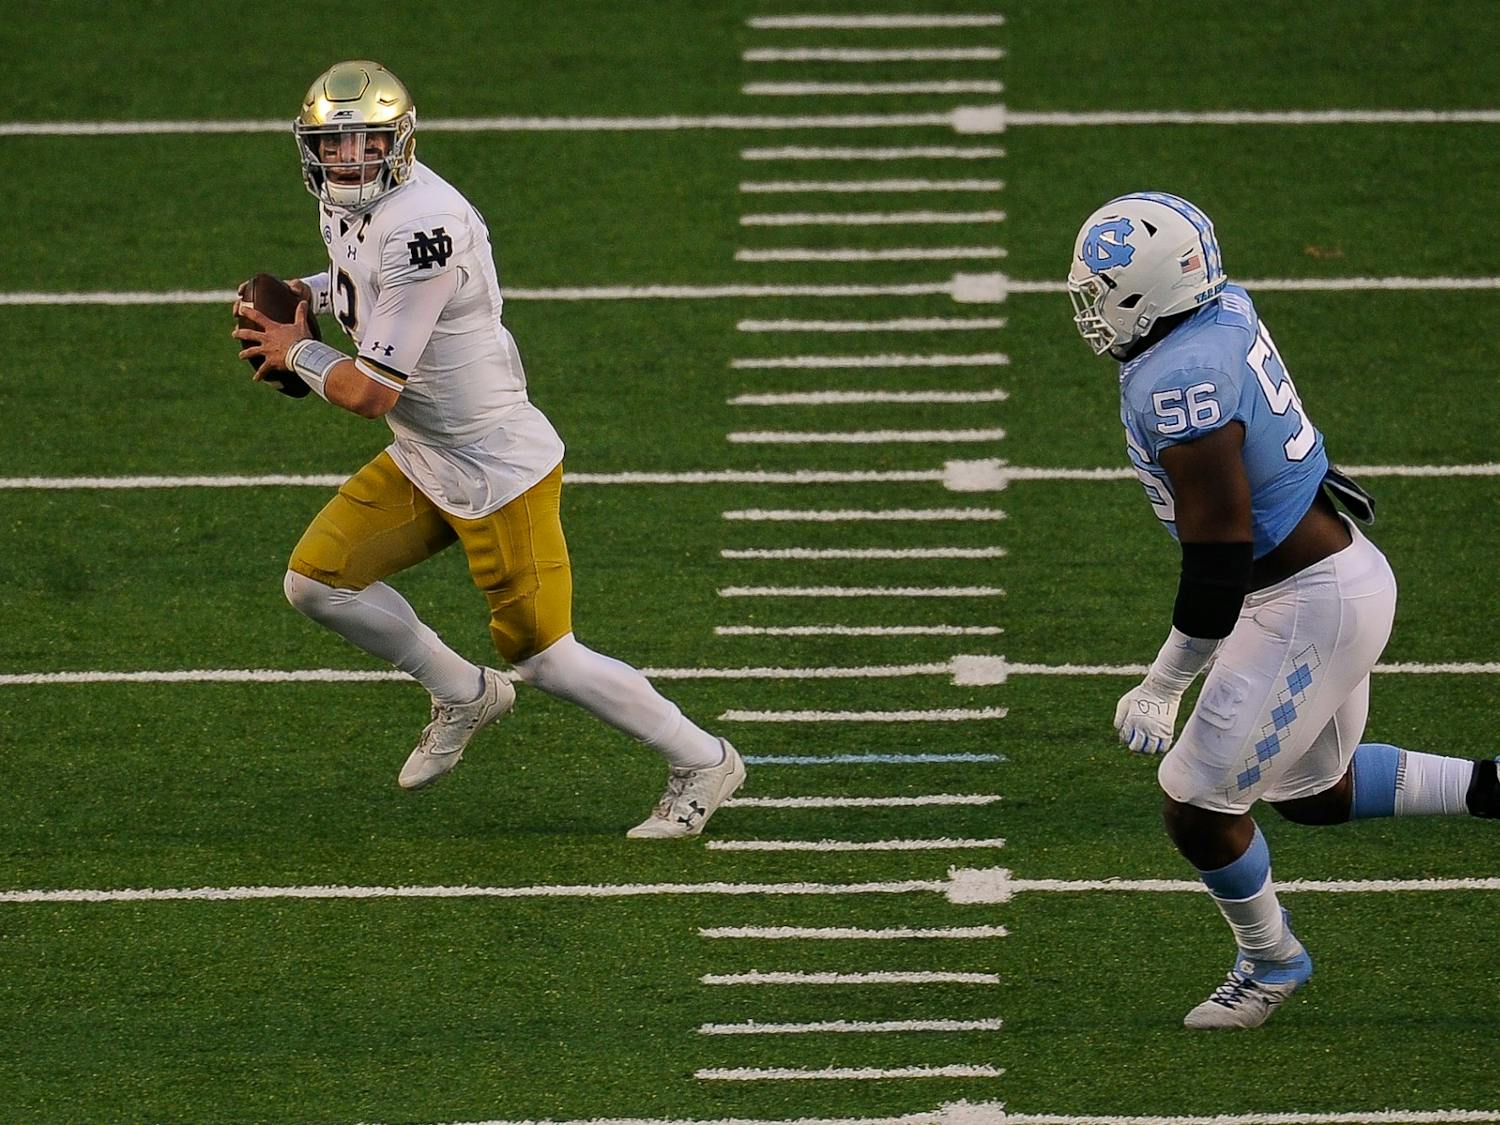 Notre Dame's graduate quarterback Ian Book (12) runs the ball downfield in Kenan Memorial Stadium during a game against UNC on Friday, Nov. 27, 2020. 